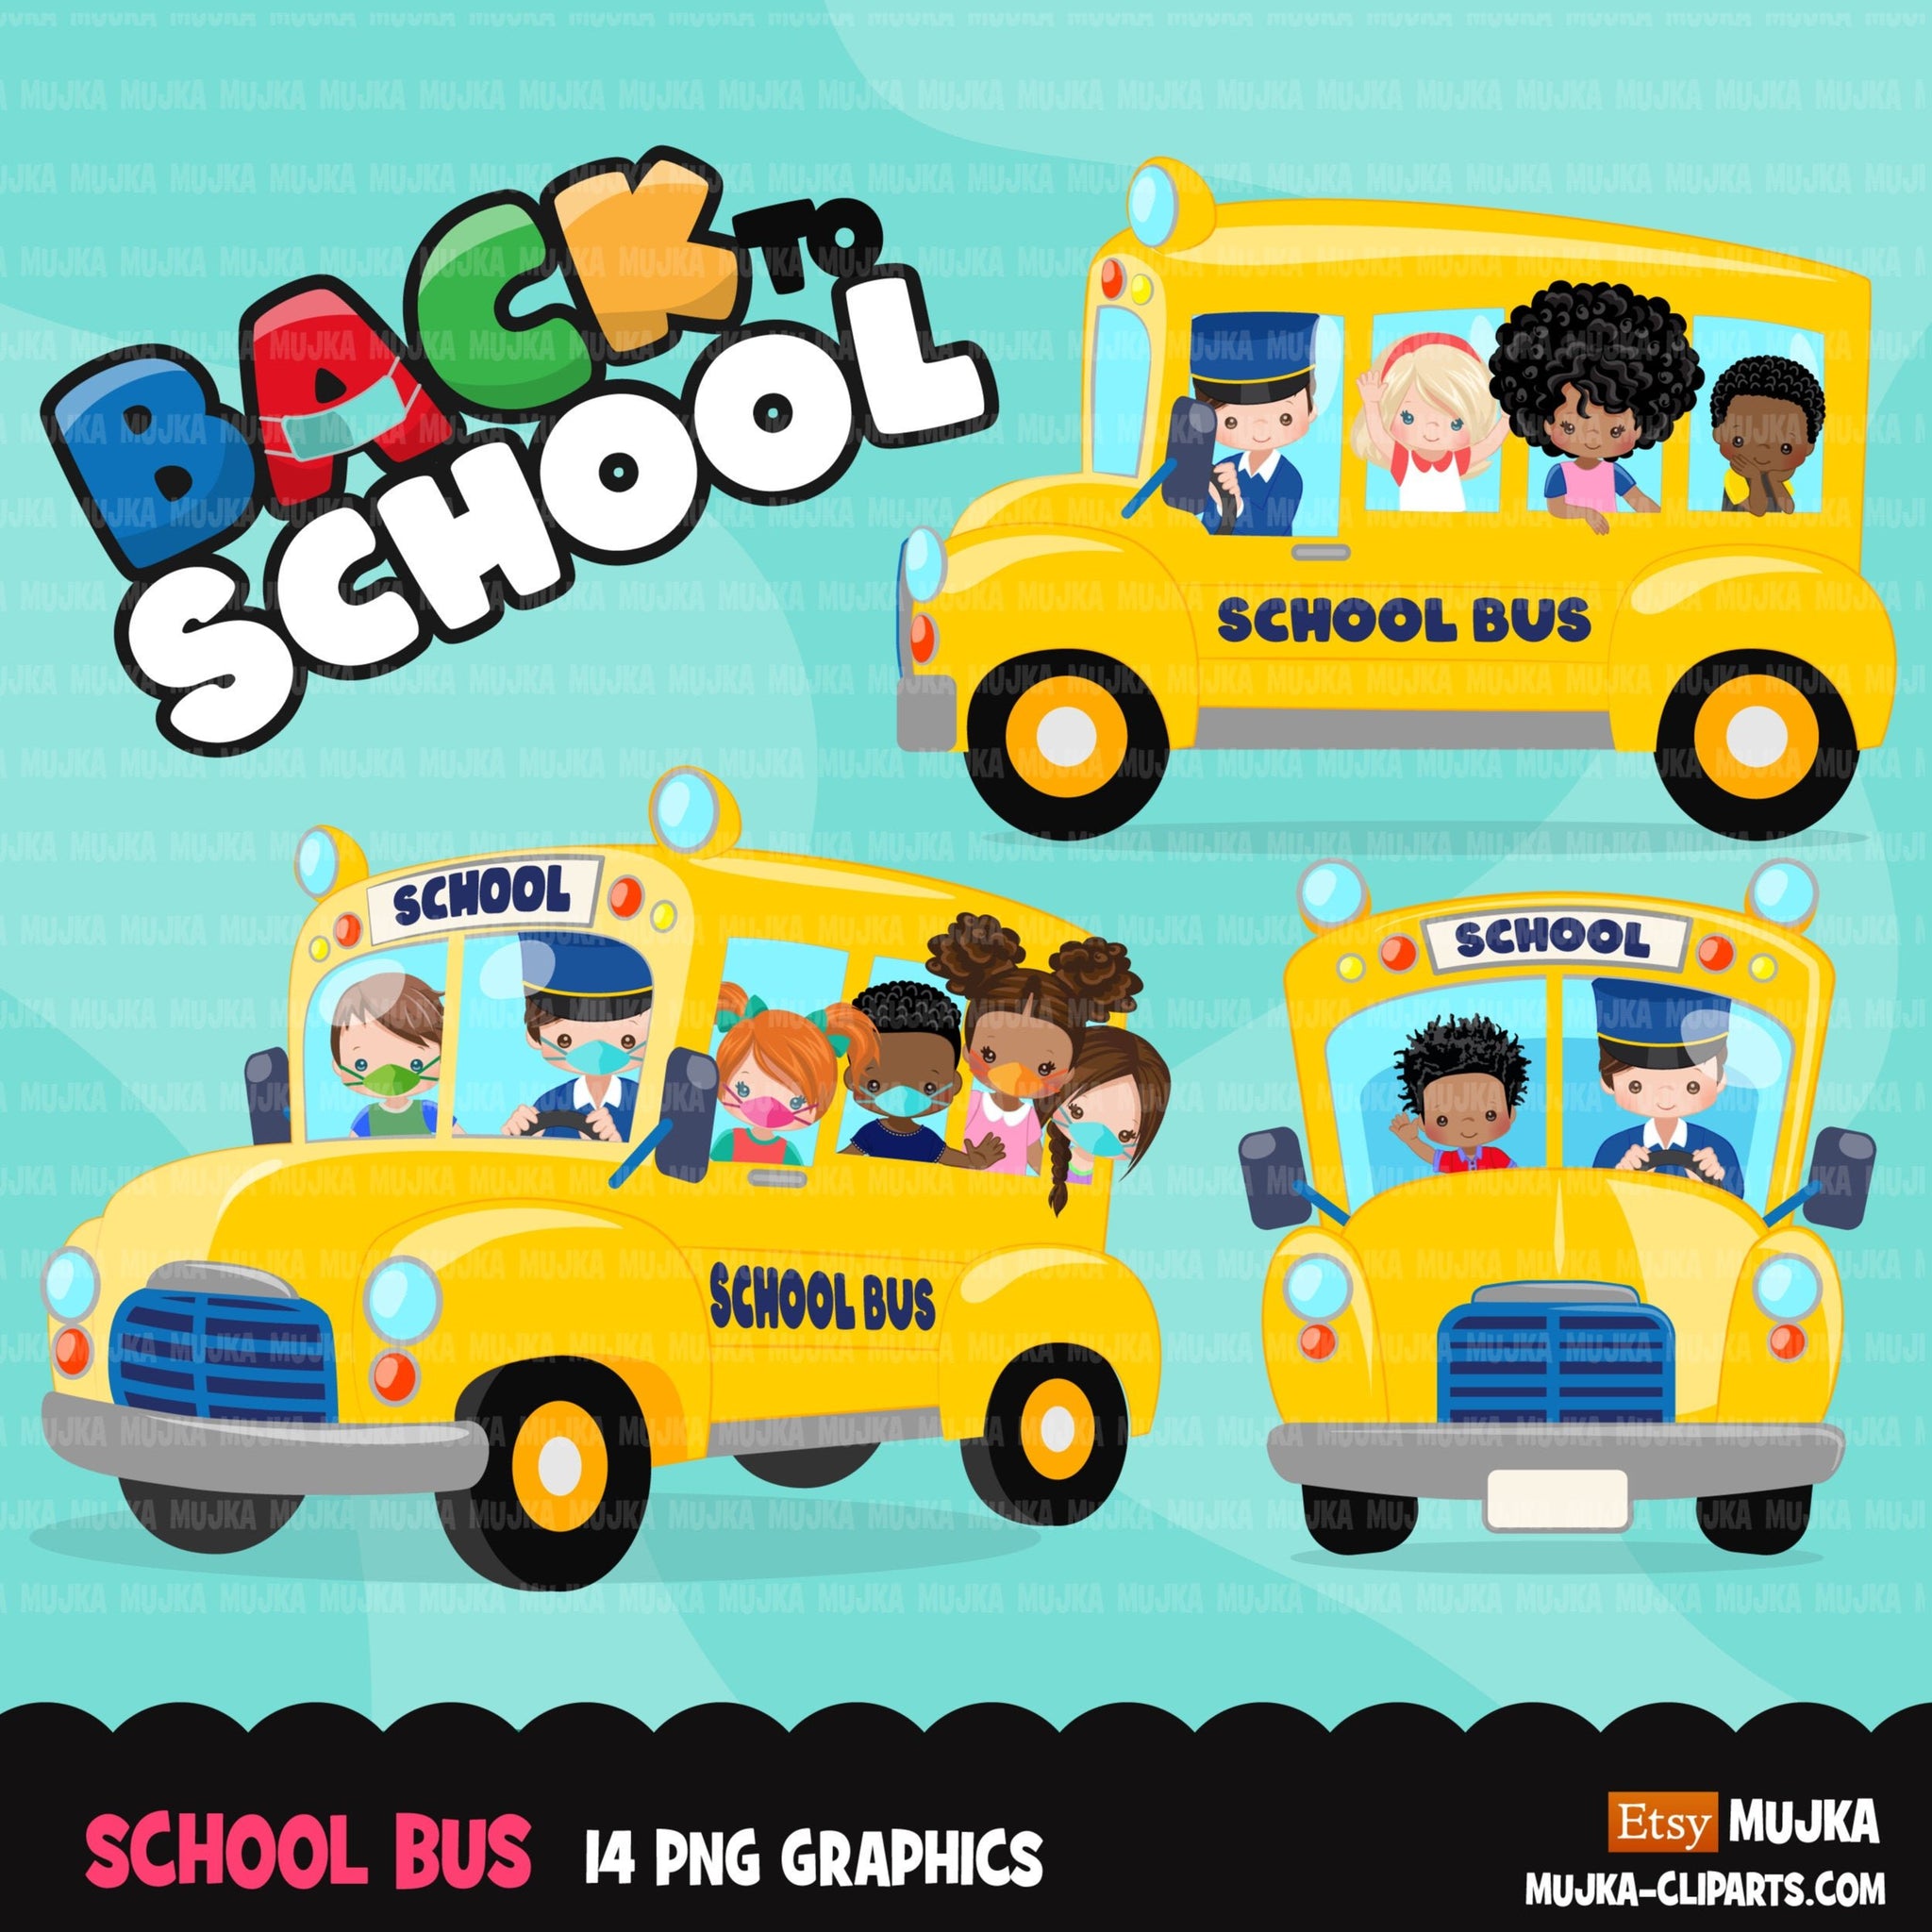 Back to school Clipart, school bus clip art, students, boy, girl with face mask, bus driver, education sublimation graphics, PNG clip art